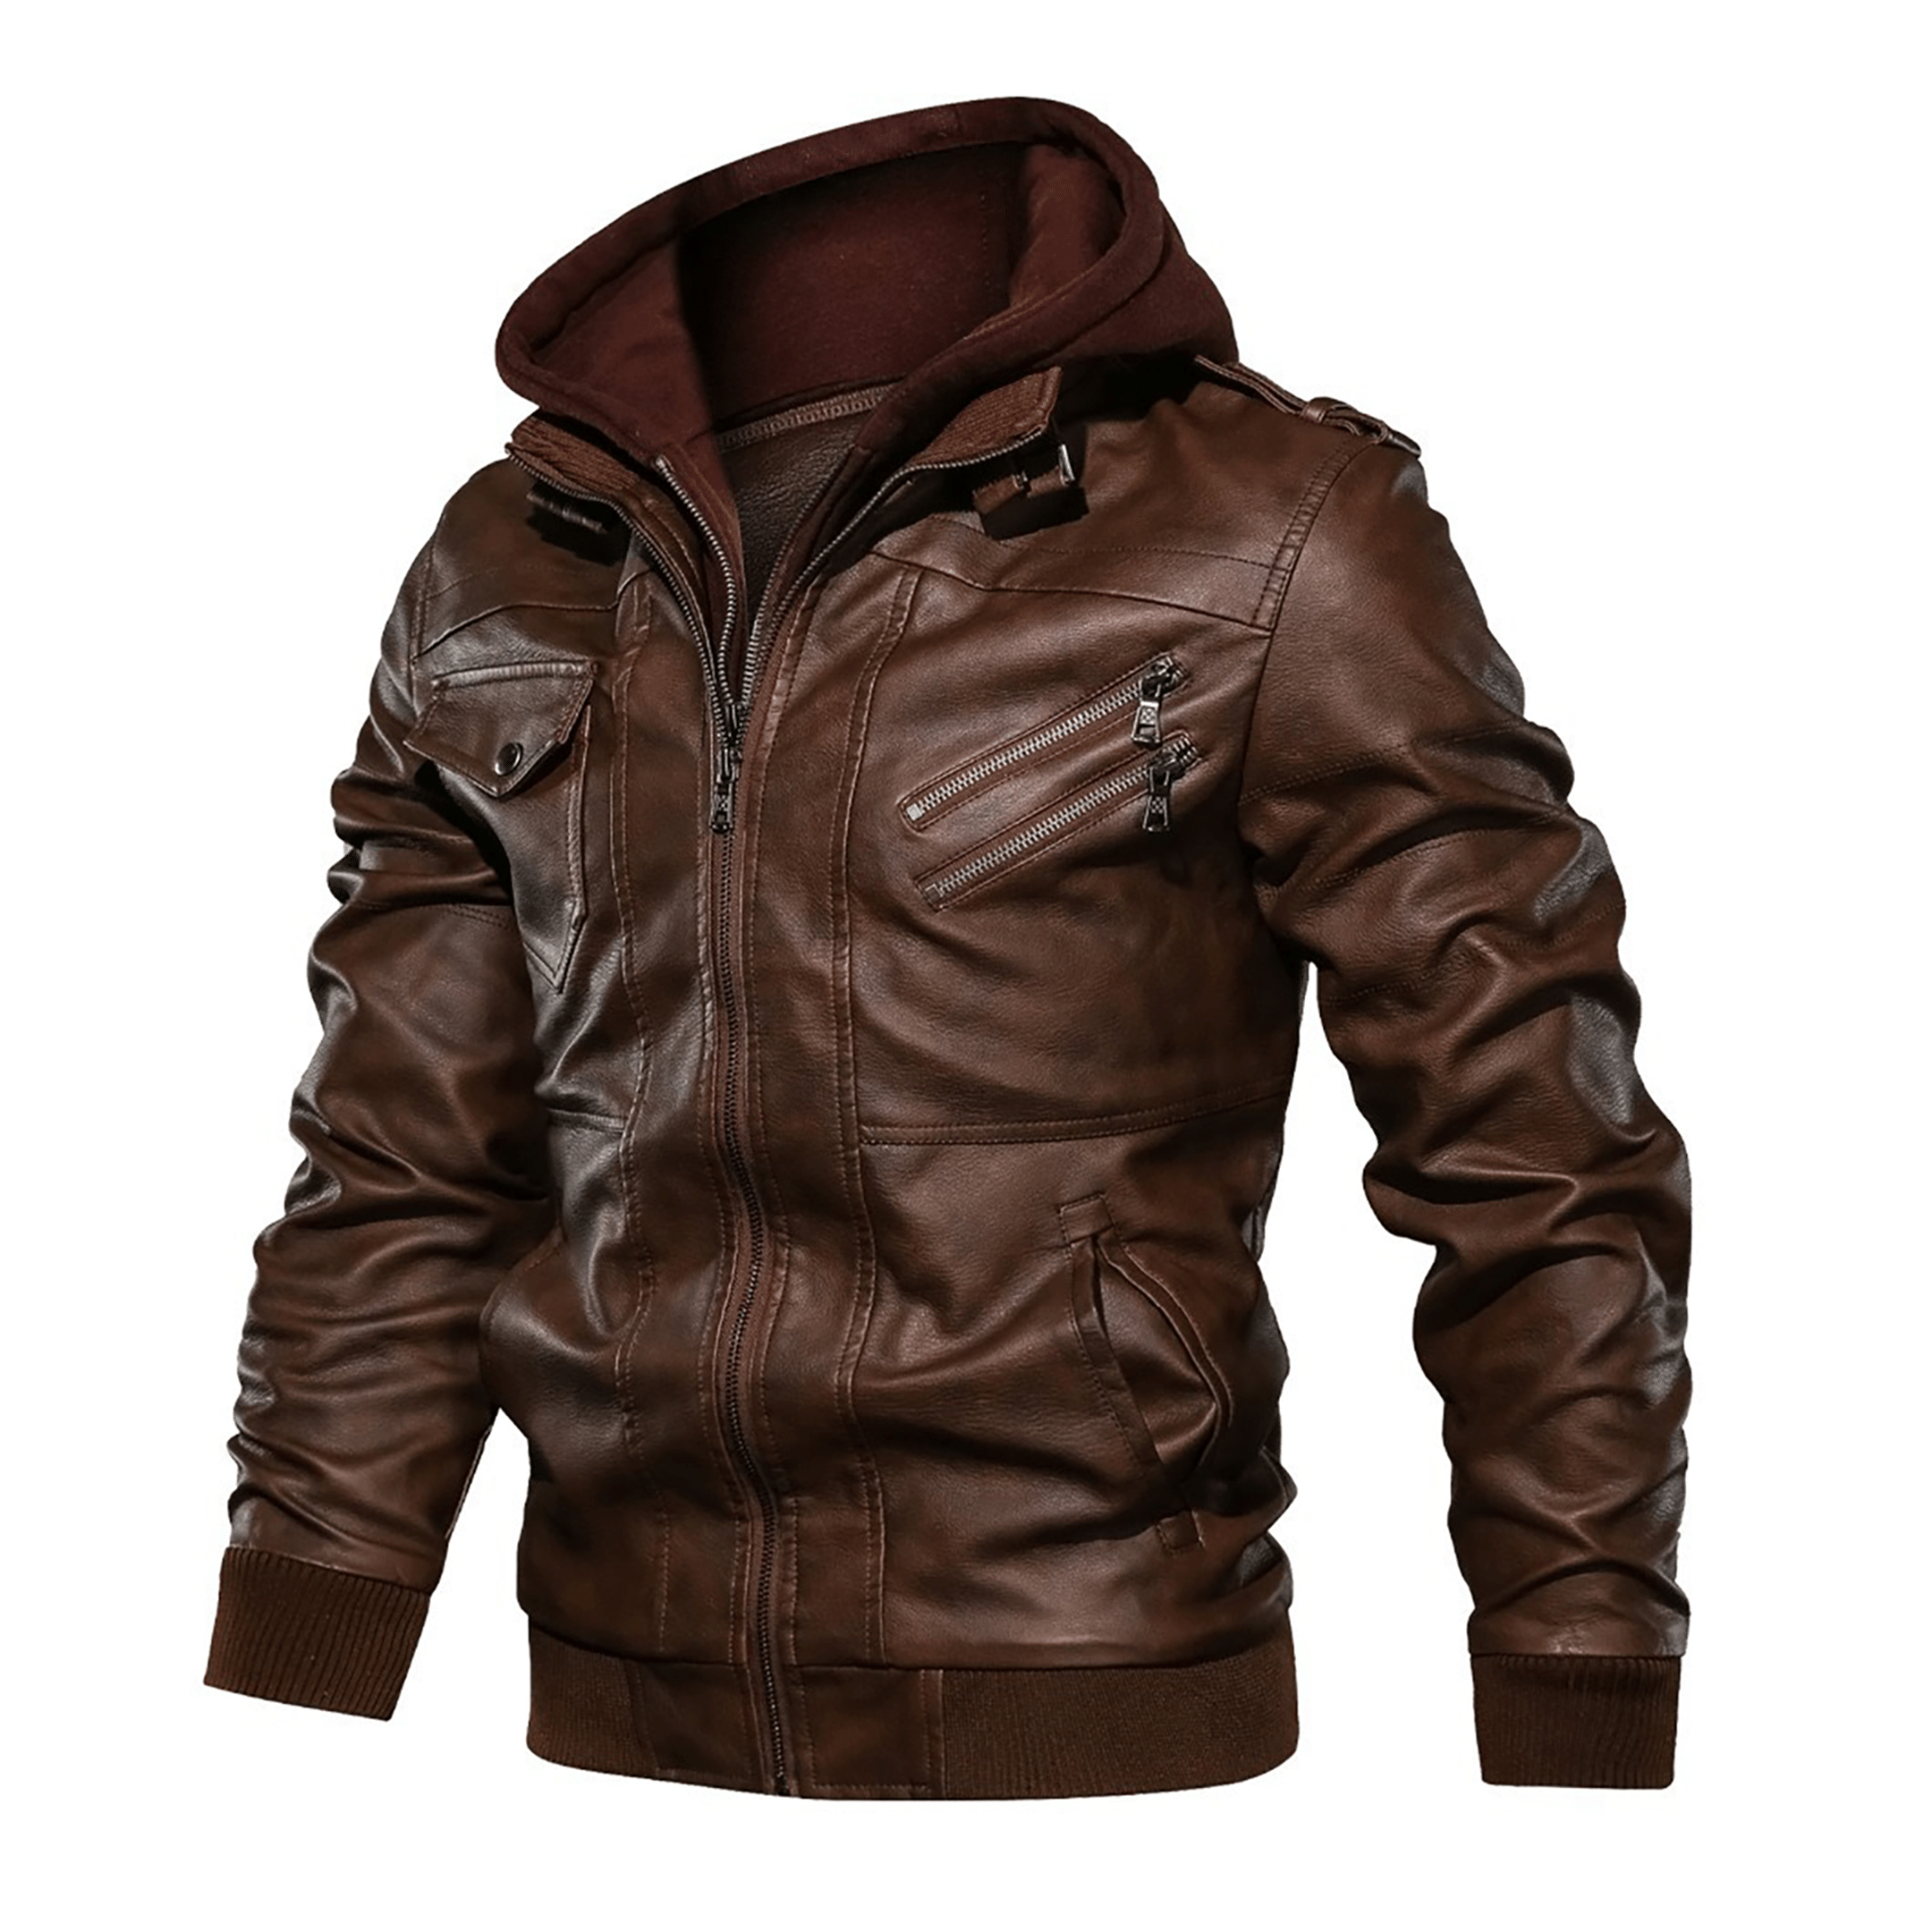 Top leather jackets and latest products 183